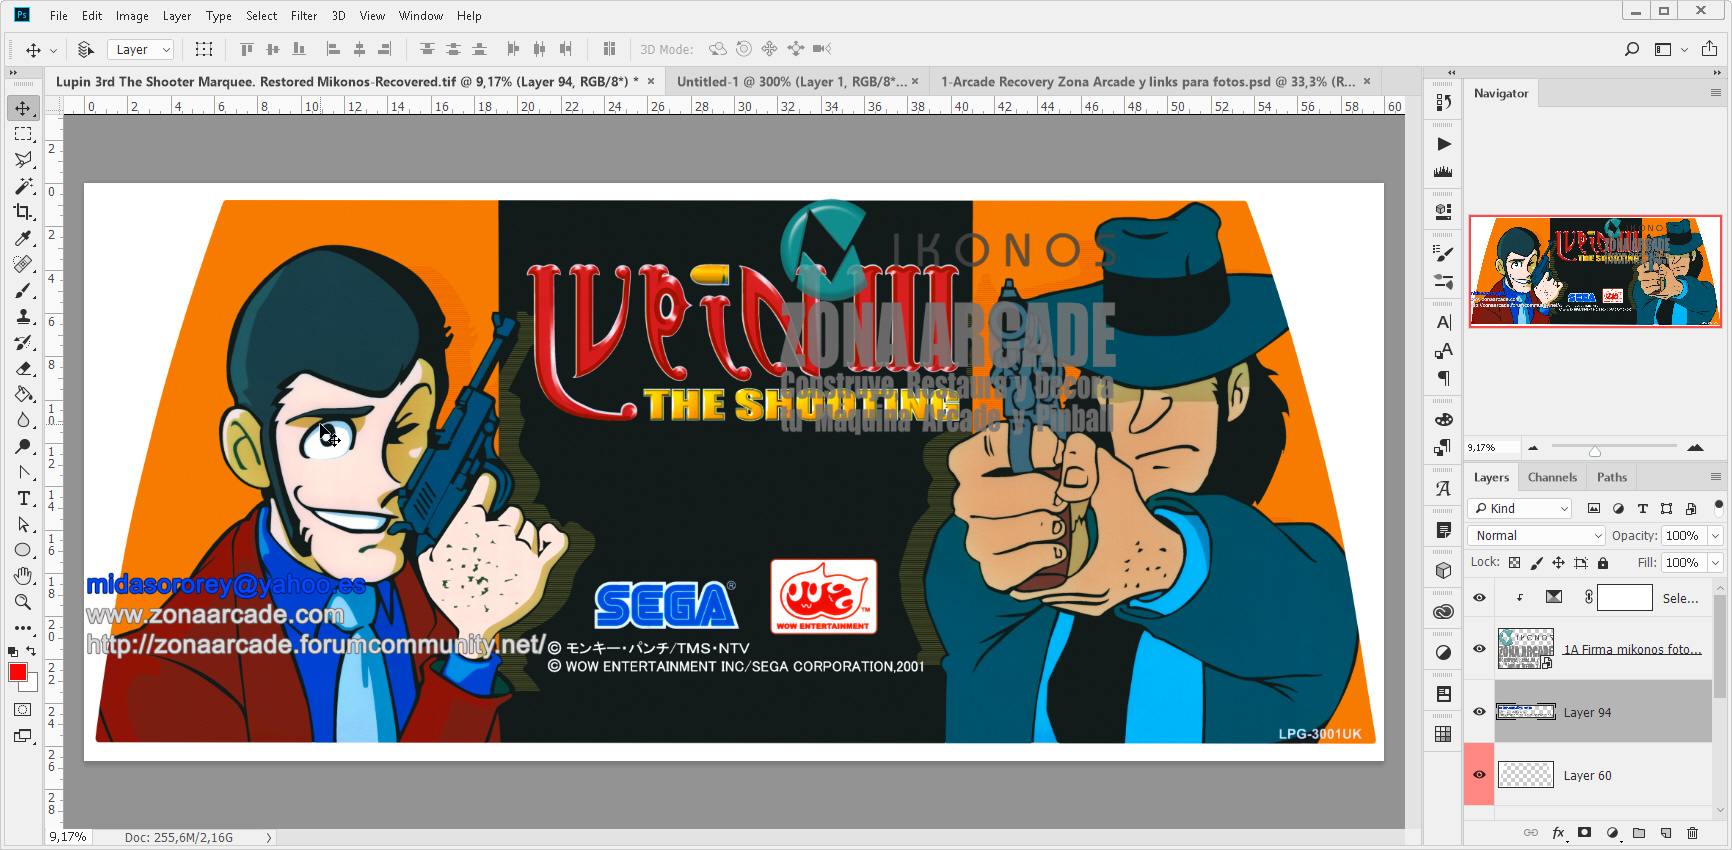 Lupin-3rd-The-Shooting-Naomi-Marquee-Restored-Mikonos1